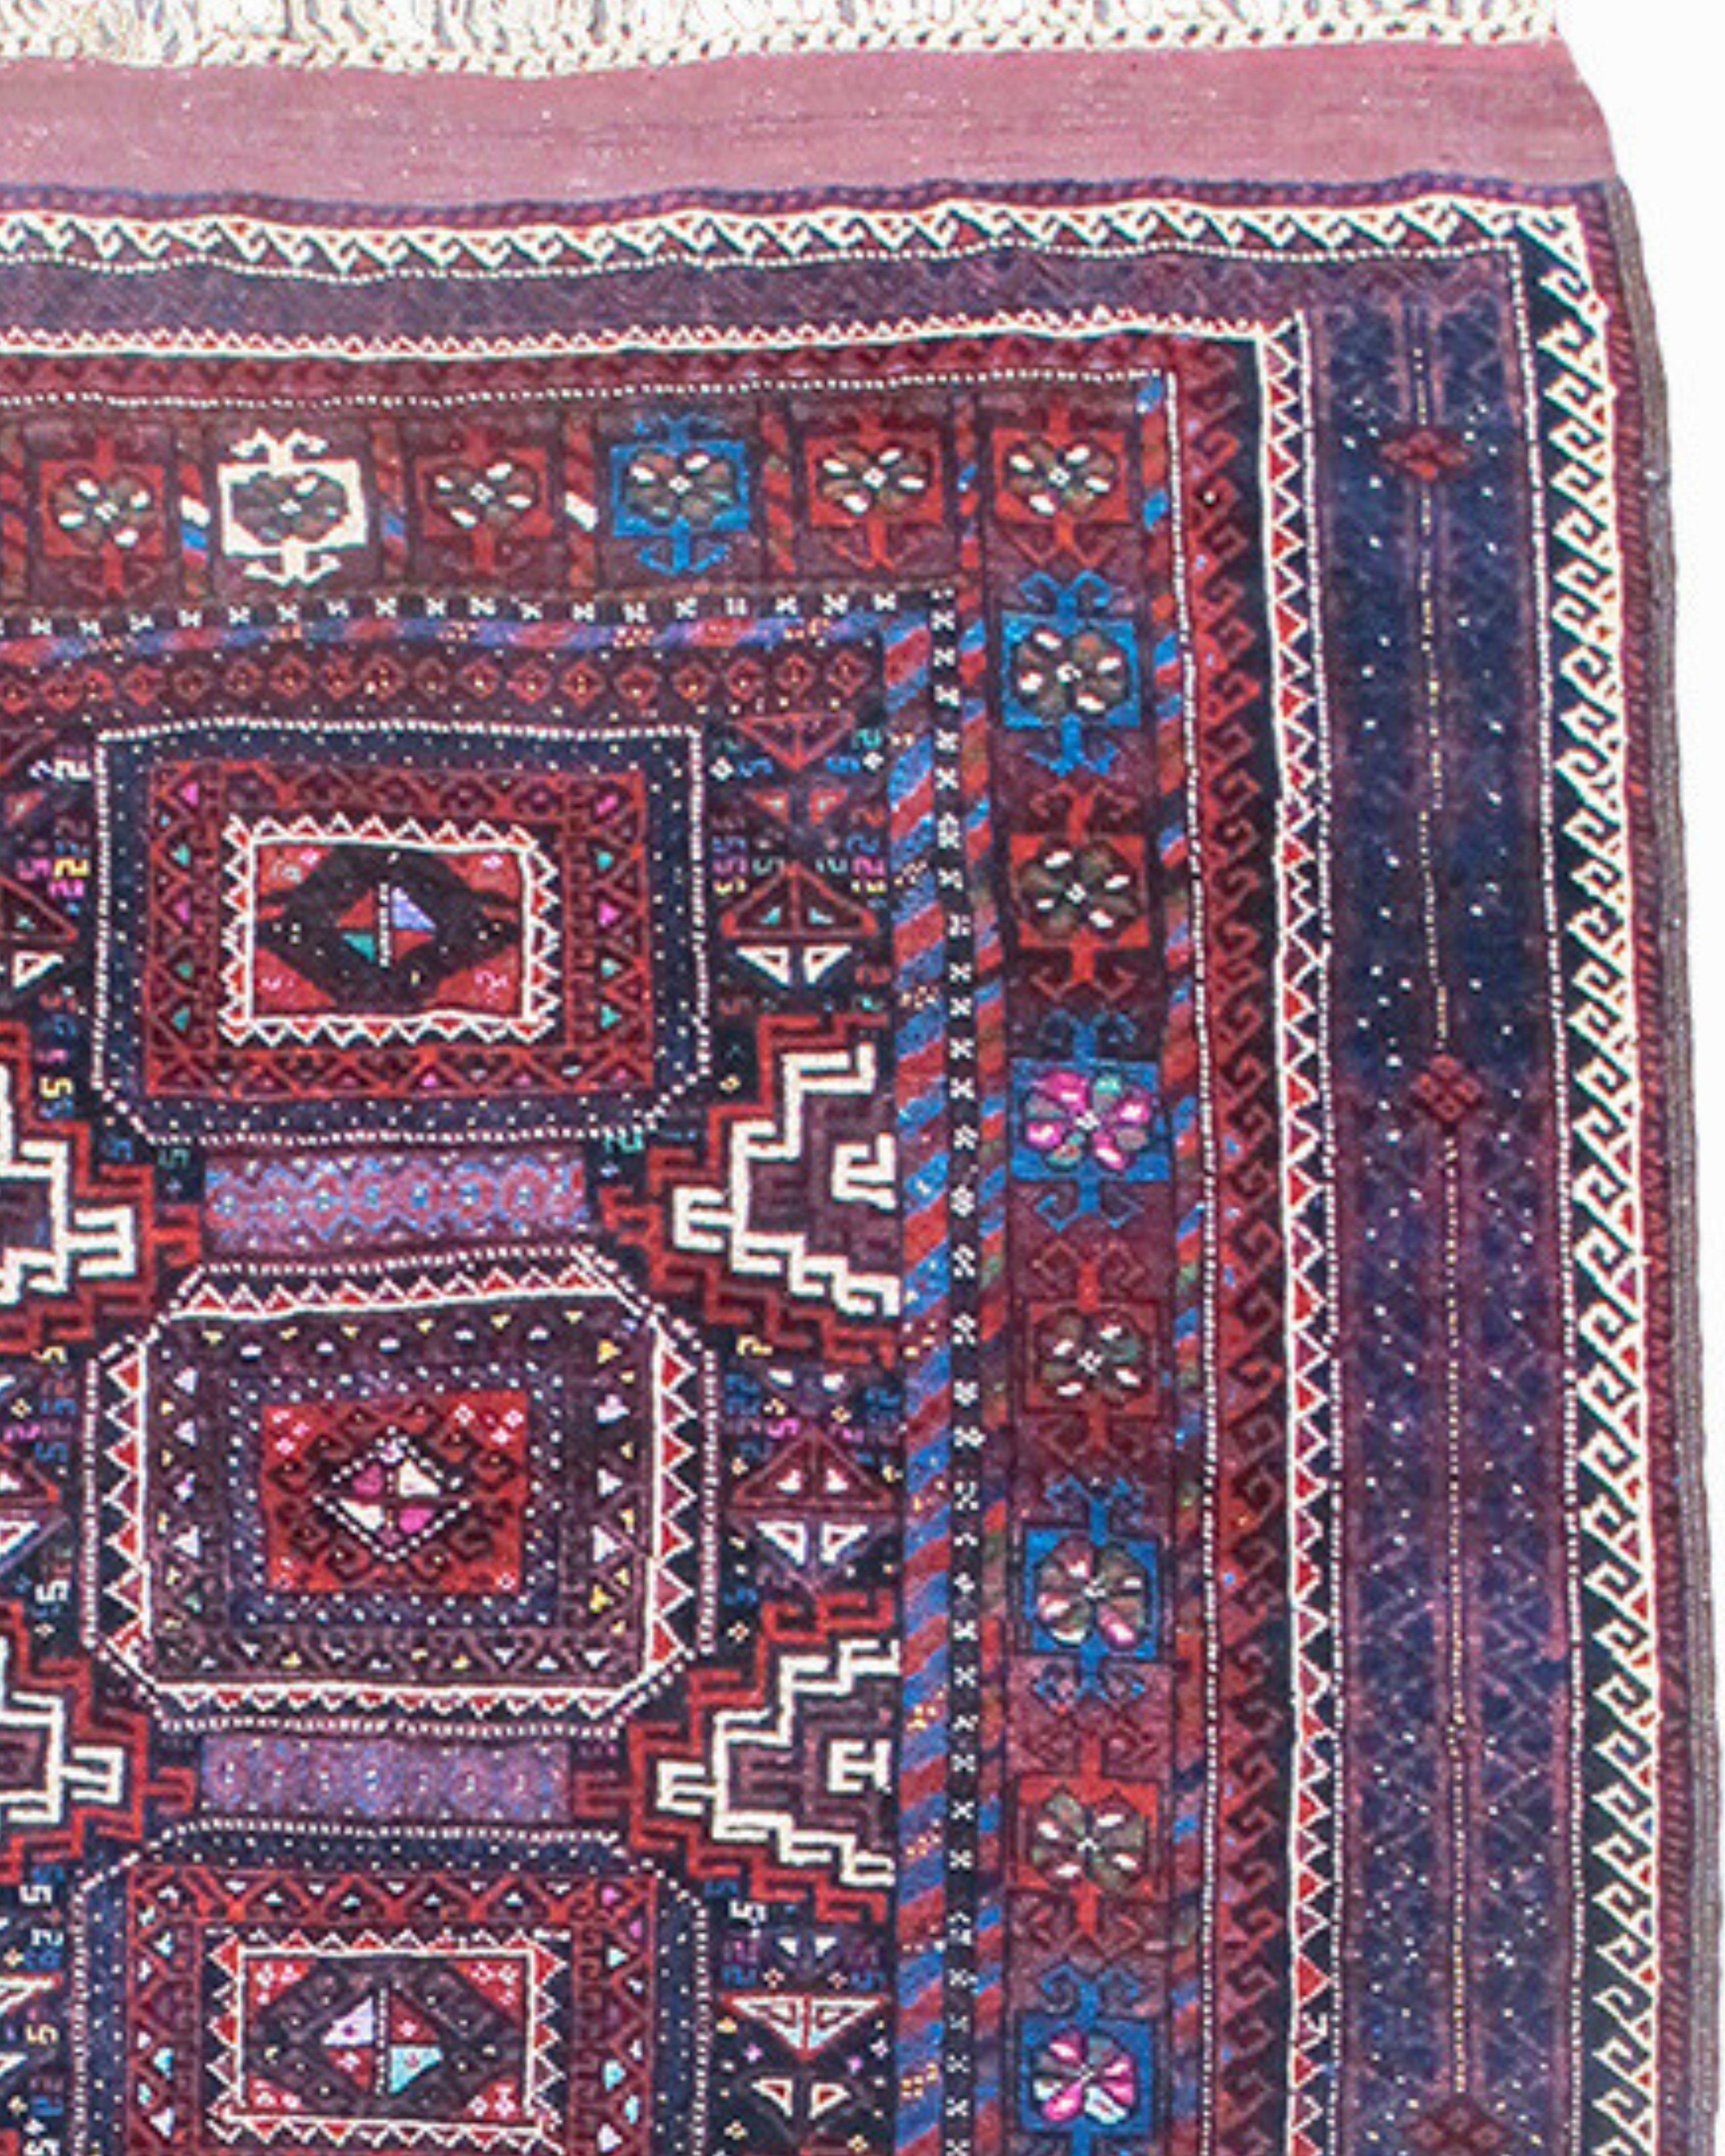 Antique Afghan Baluch Rug, Early 20th Century

Additional Information:
Dimensions: 8'6